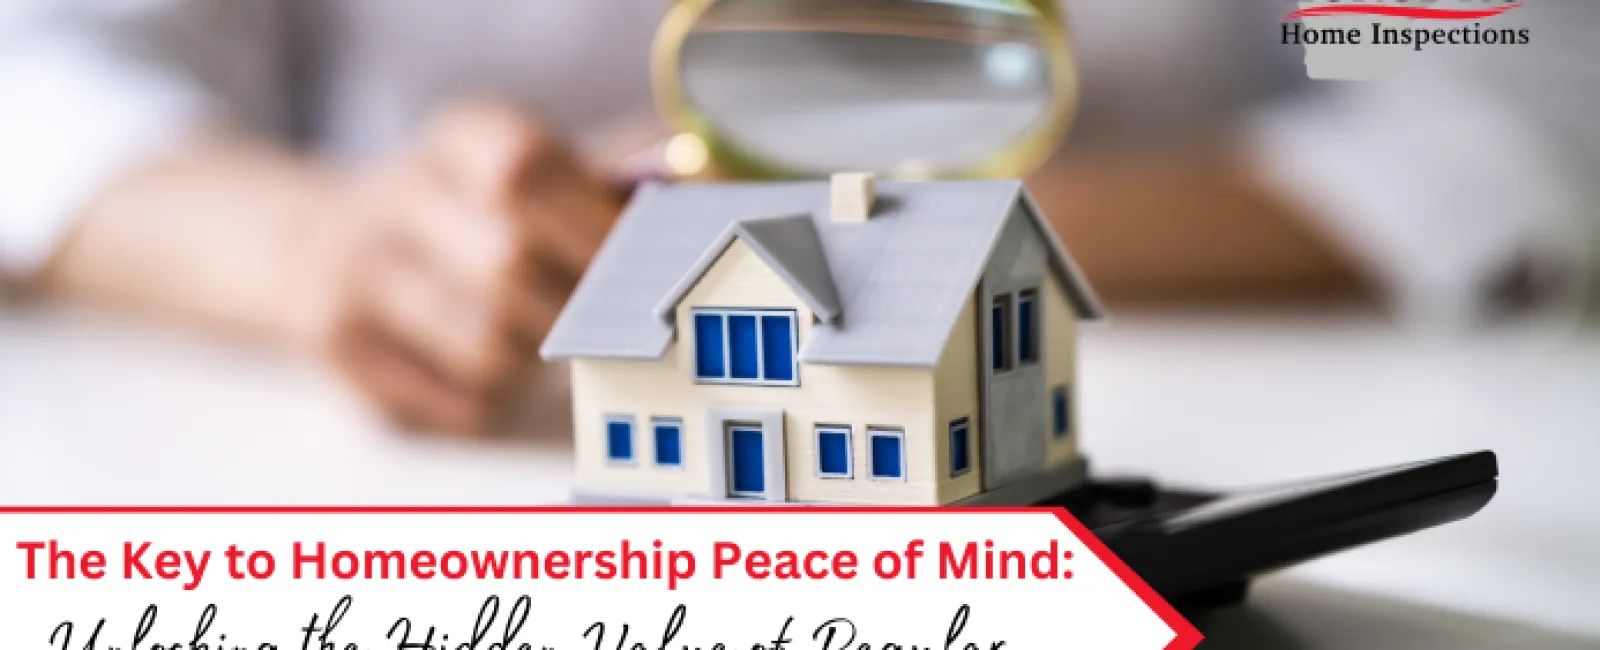 The Key to Homeownership Peace of Mind: Unlocking the Hidden Value of Regular Home Maintenance Inspections